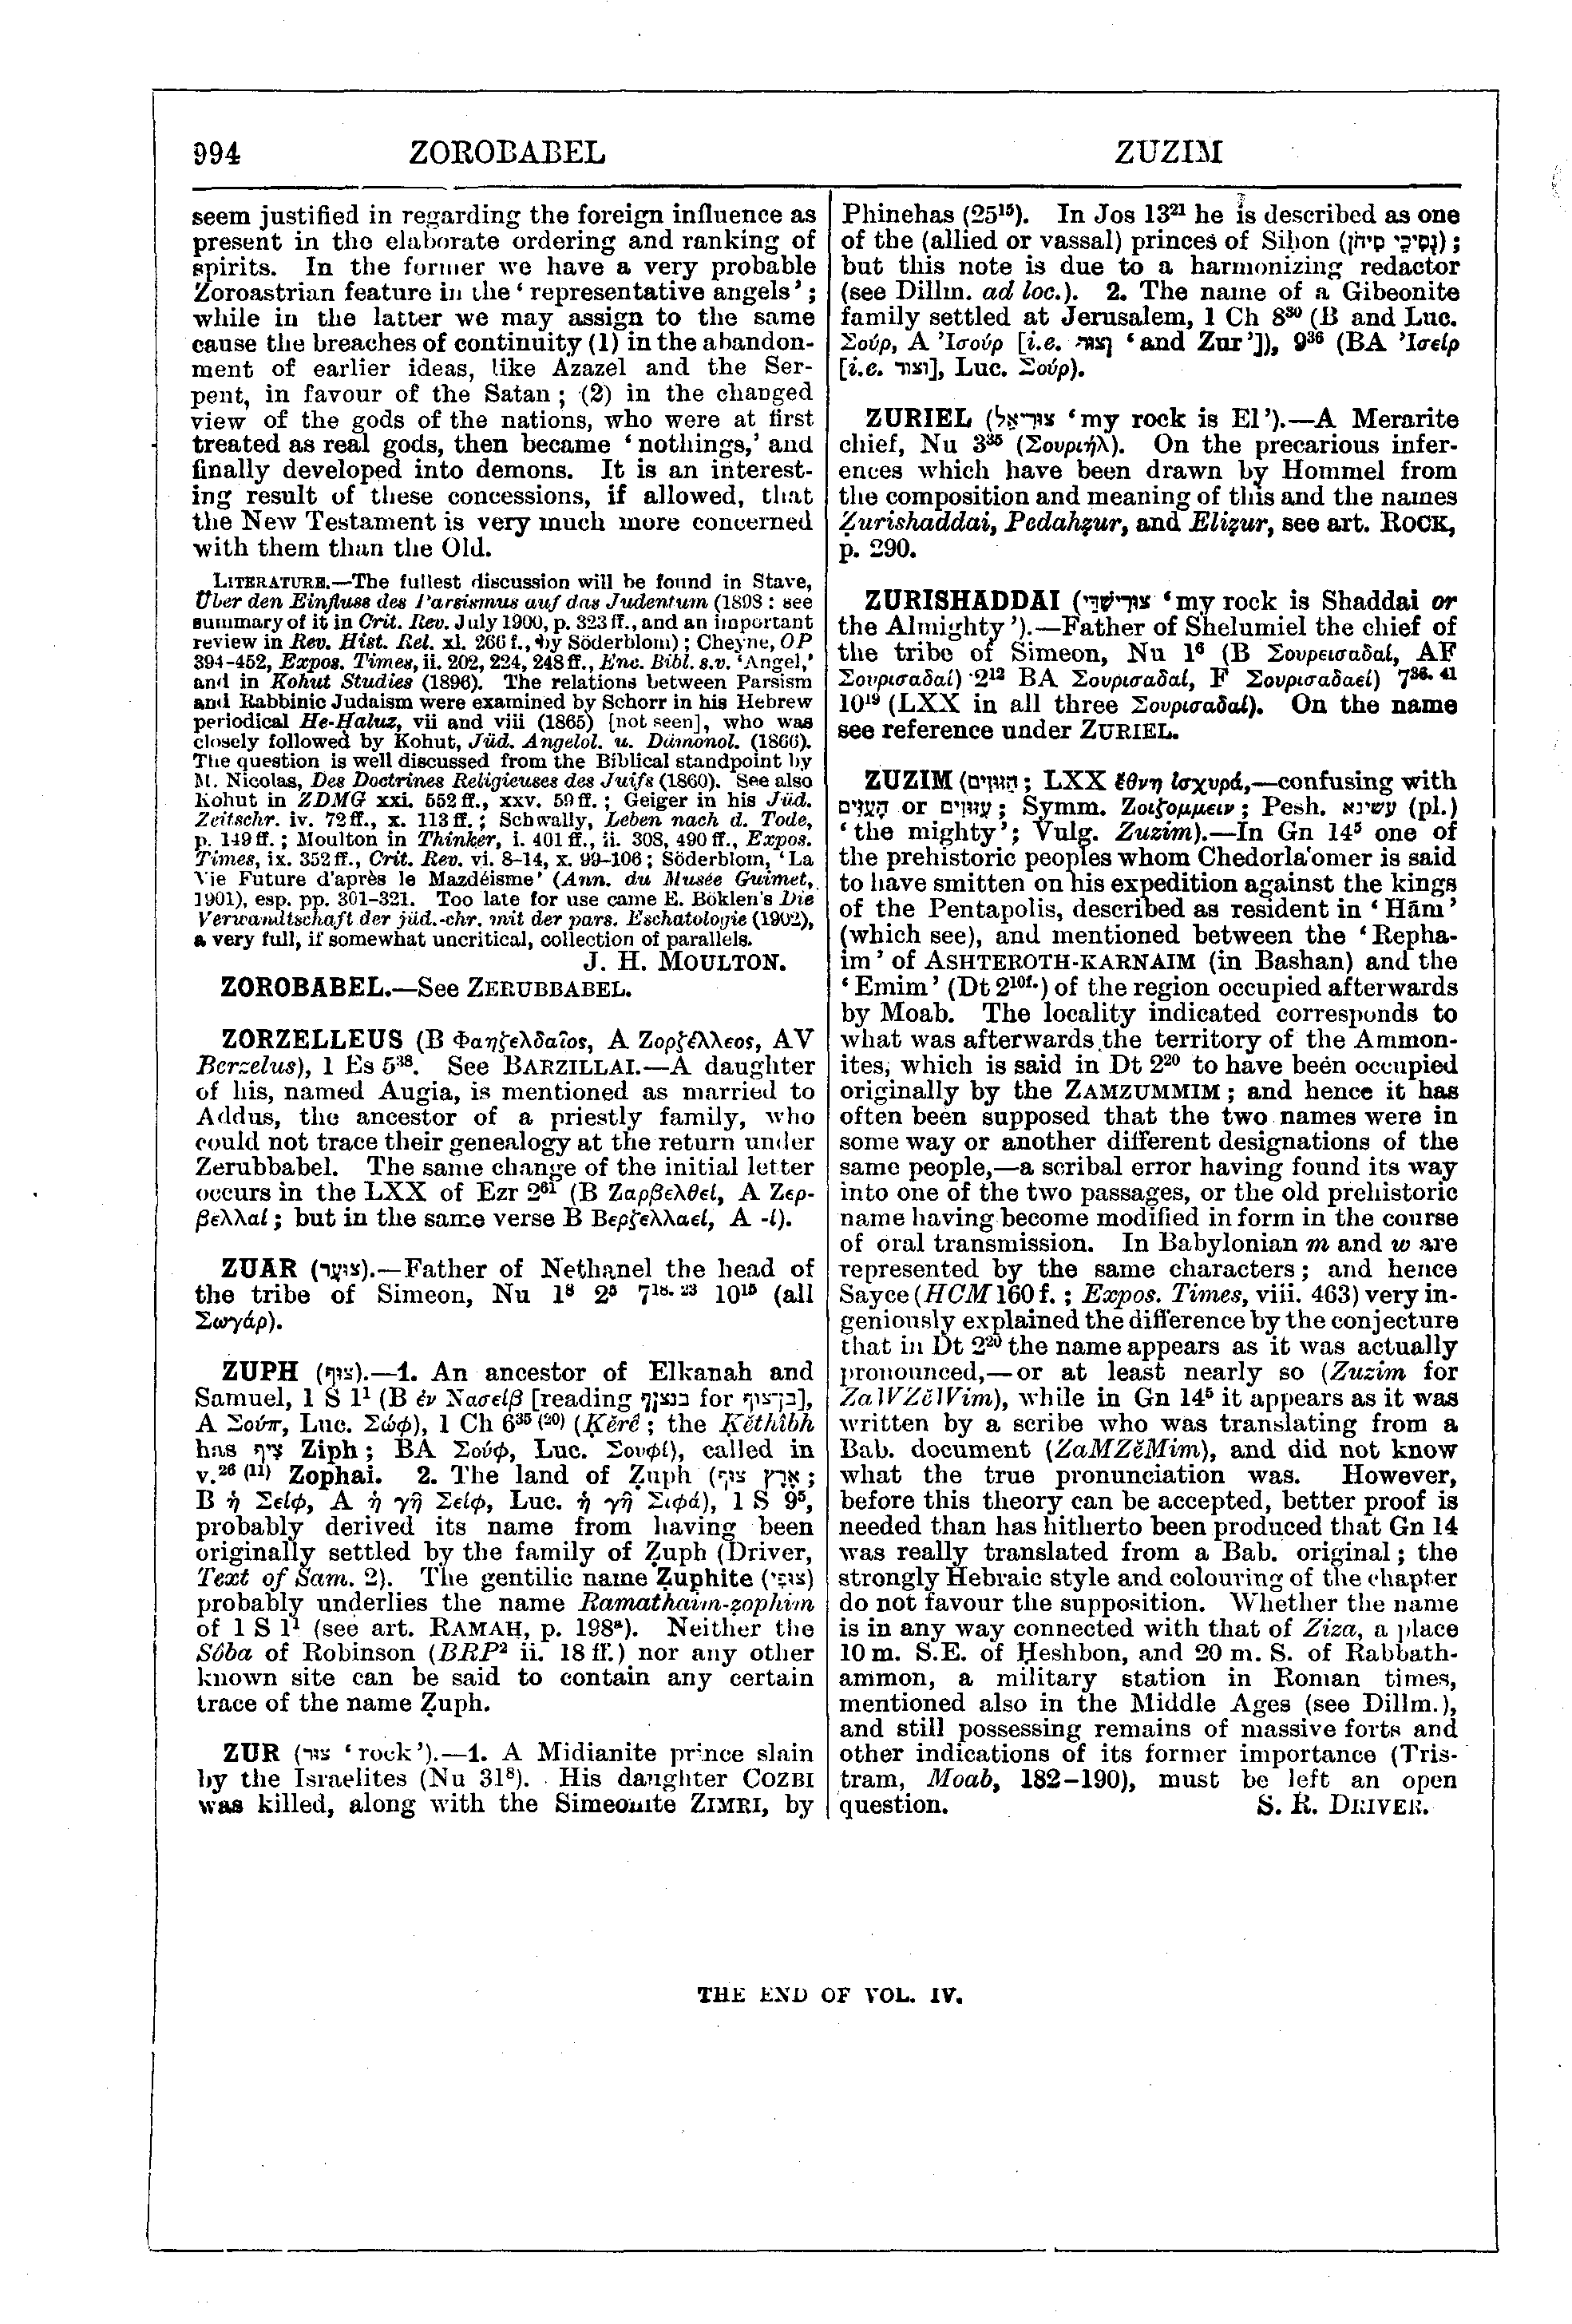 Image of page 994